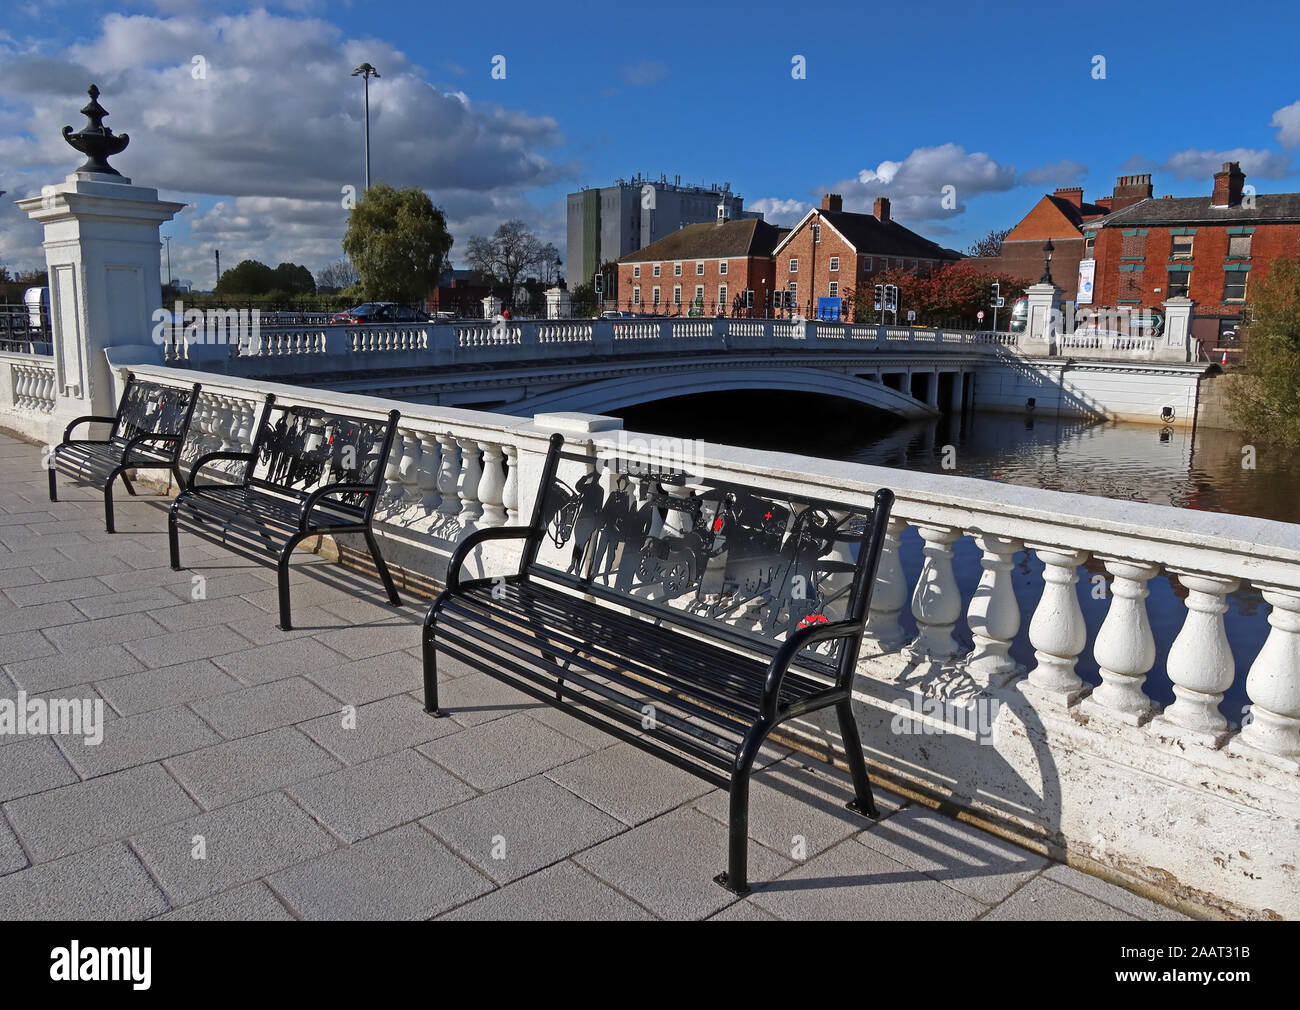 Cenotaph Benches Bridgefoot Warrington Oct 2019, WA1 1WA - High Tide and flooding of the River Mersey Crossing, Cheshire, North West England, UK Stock Photo